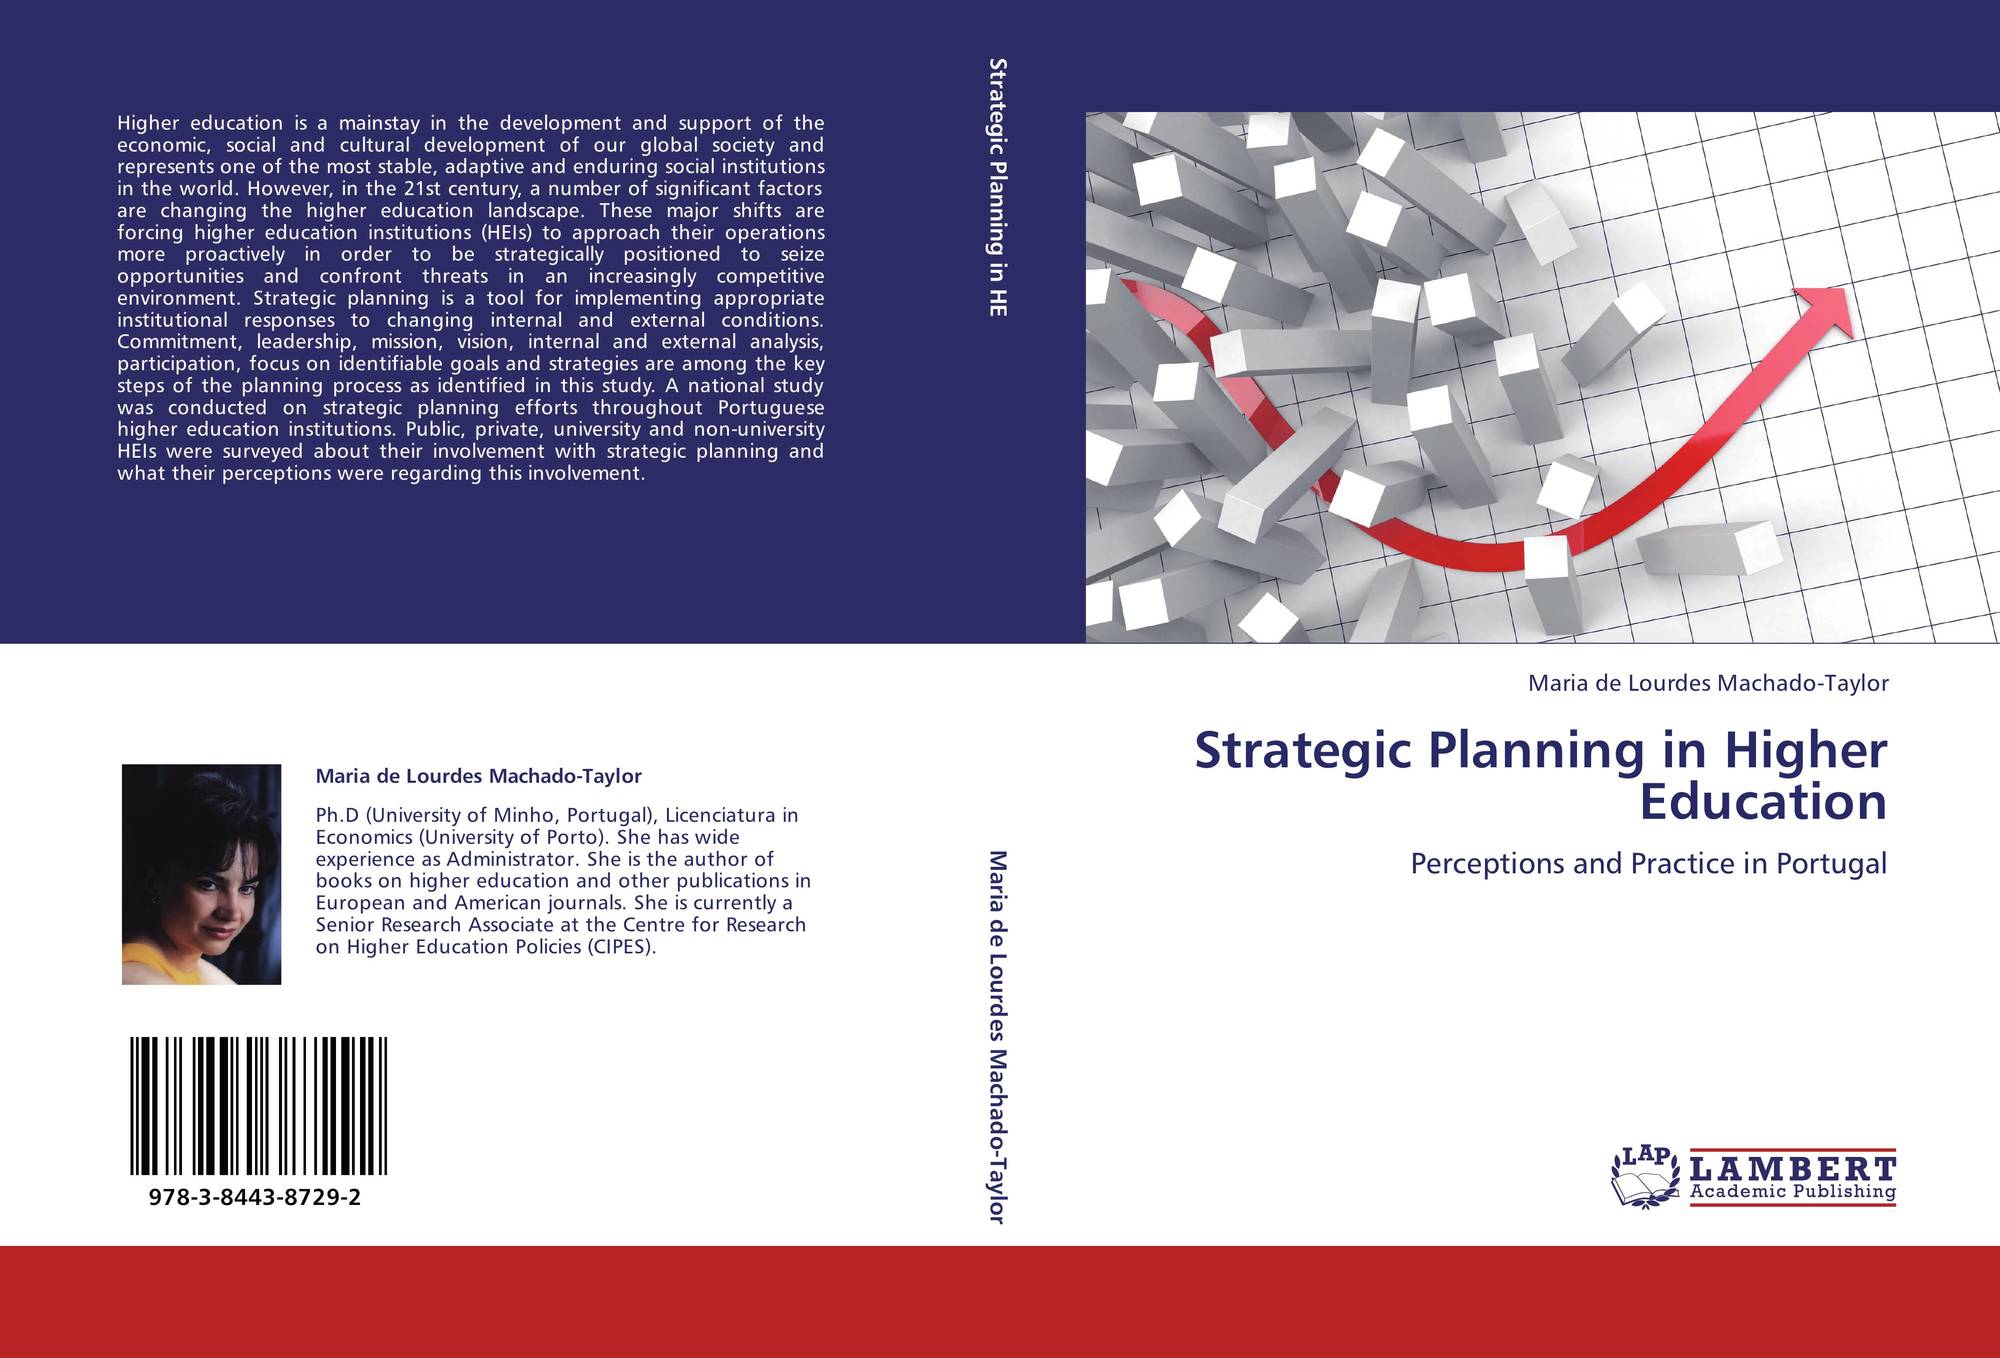 importance of strategic planning in higher education